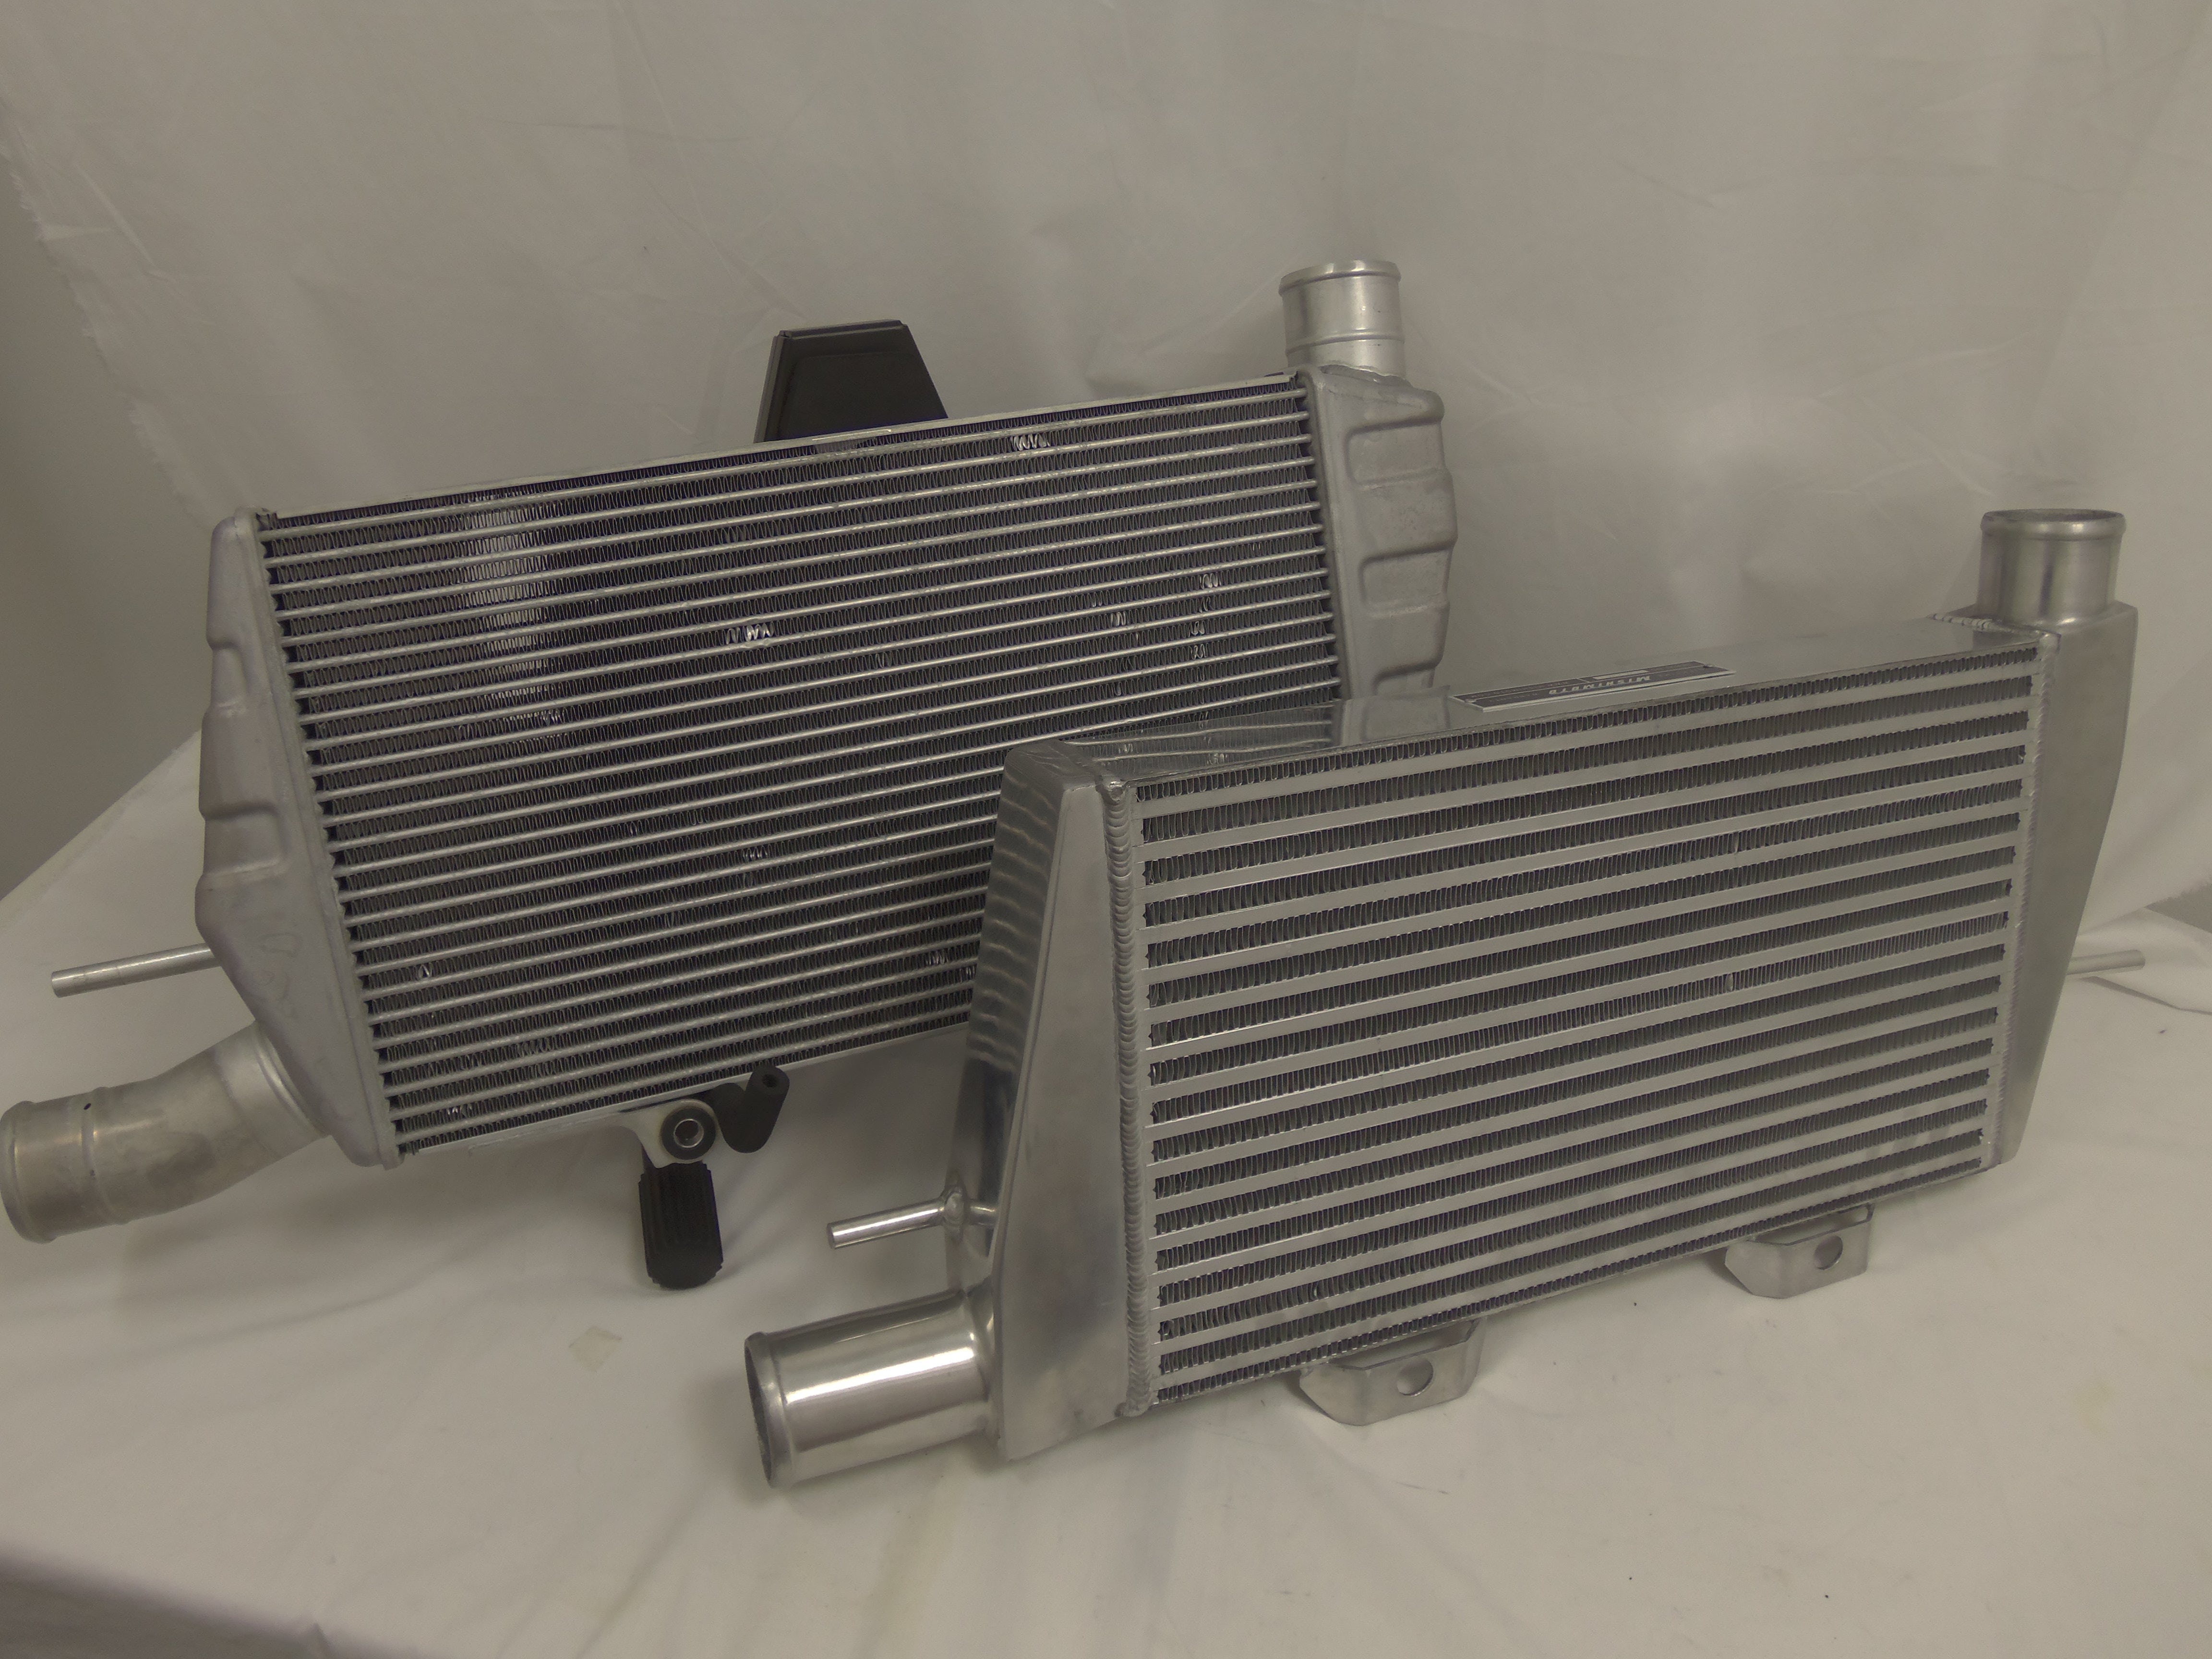 2008-2014 Mitsubishi Lancer Evolution Performance Intercooler Part 1: Product Introduction, Goals and Initial Testing